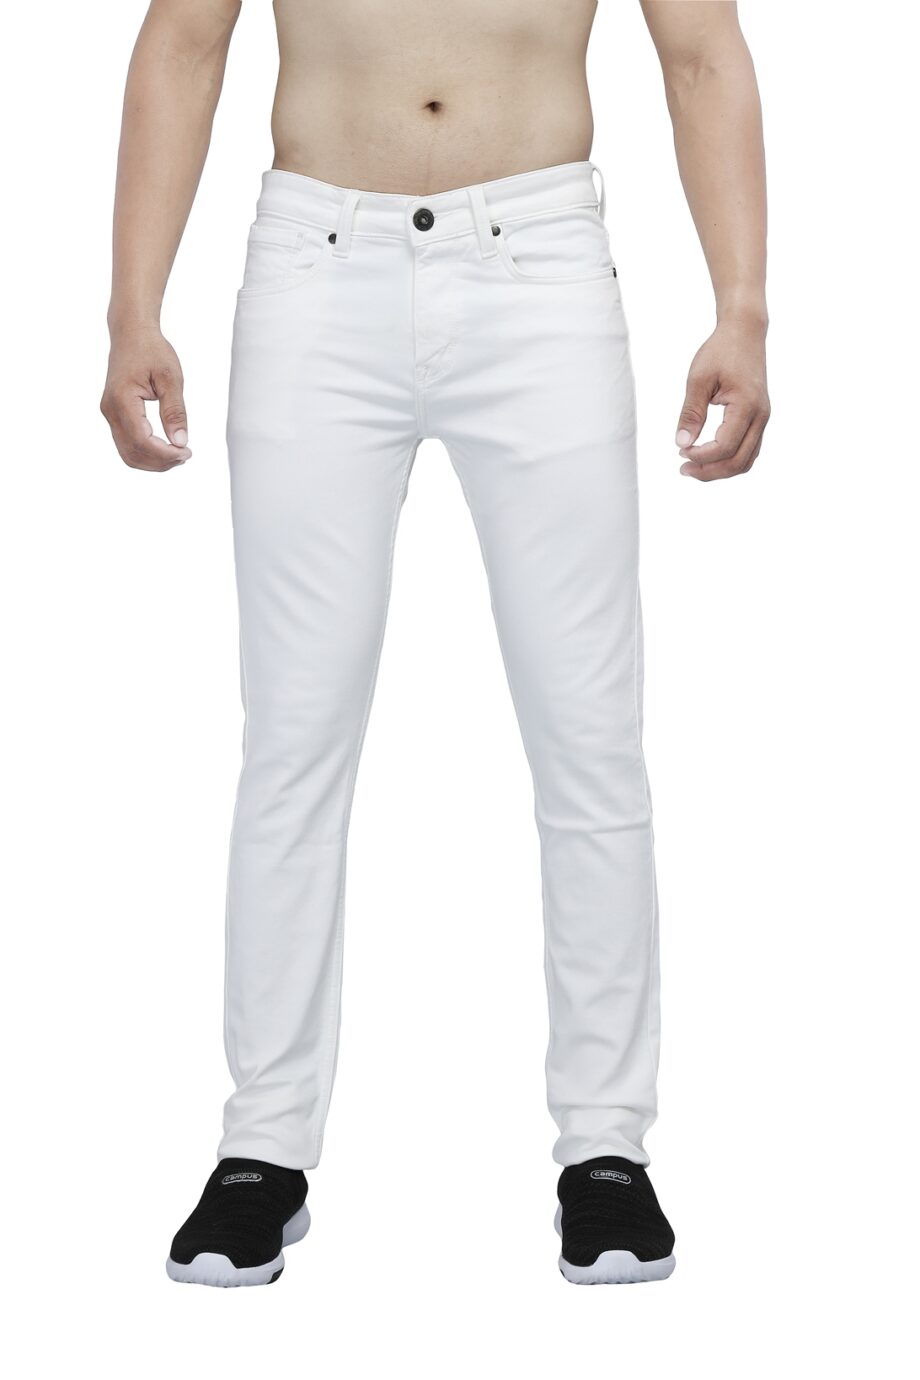 Stretchable white jeans pant for men